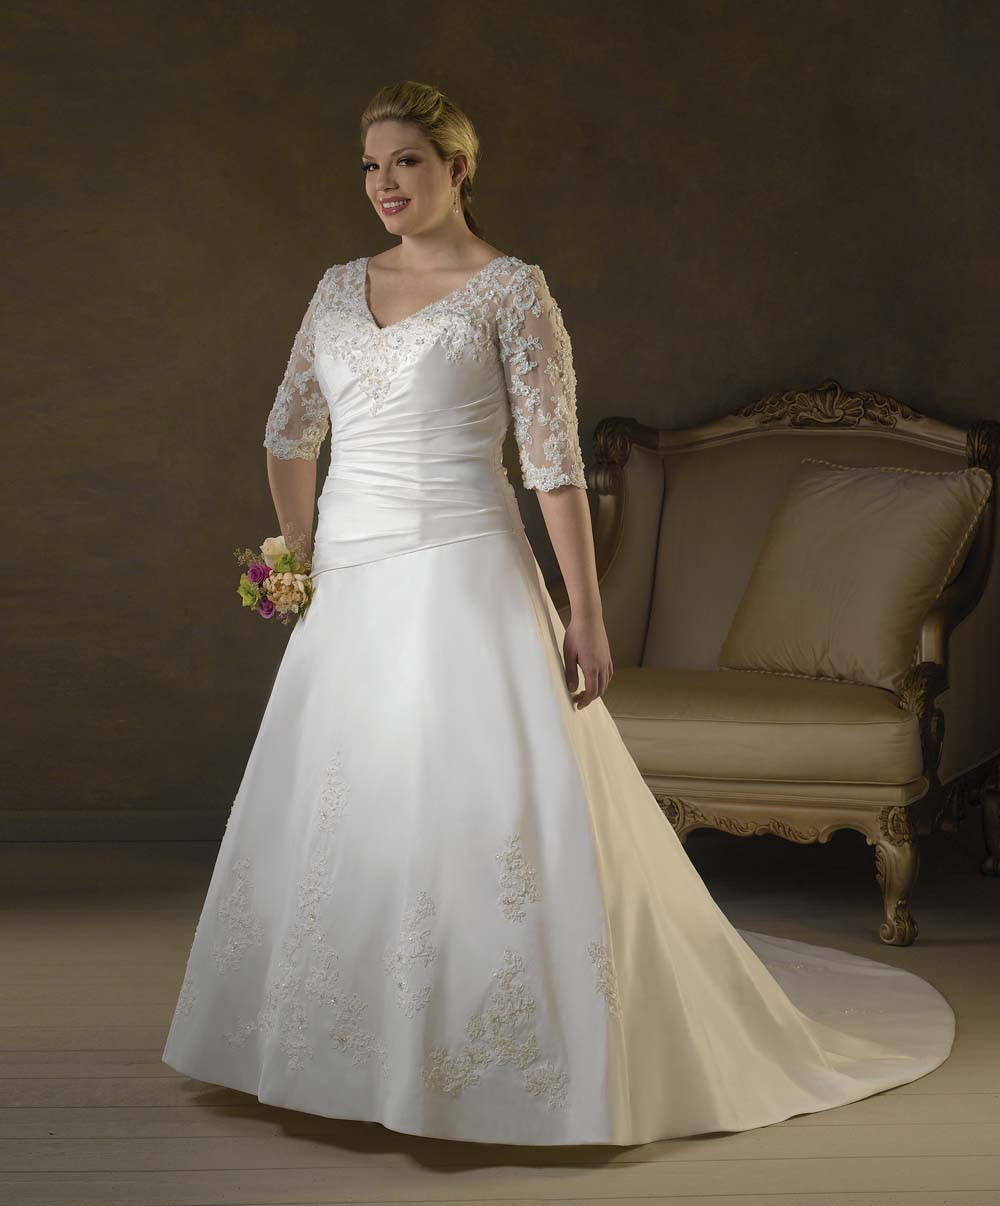 Plus Size Wedding Gowns With Sleeves
 Plus Size 3 4 Lace Sleeves Wedding Dress Gown